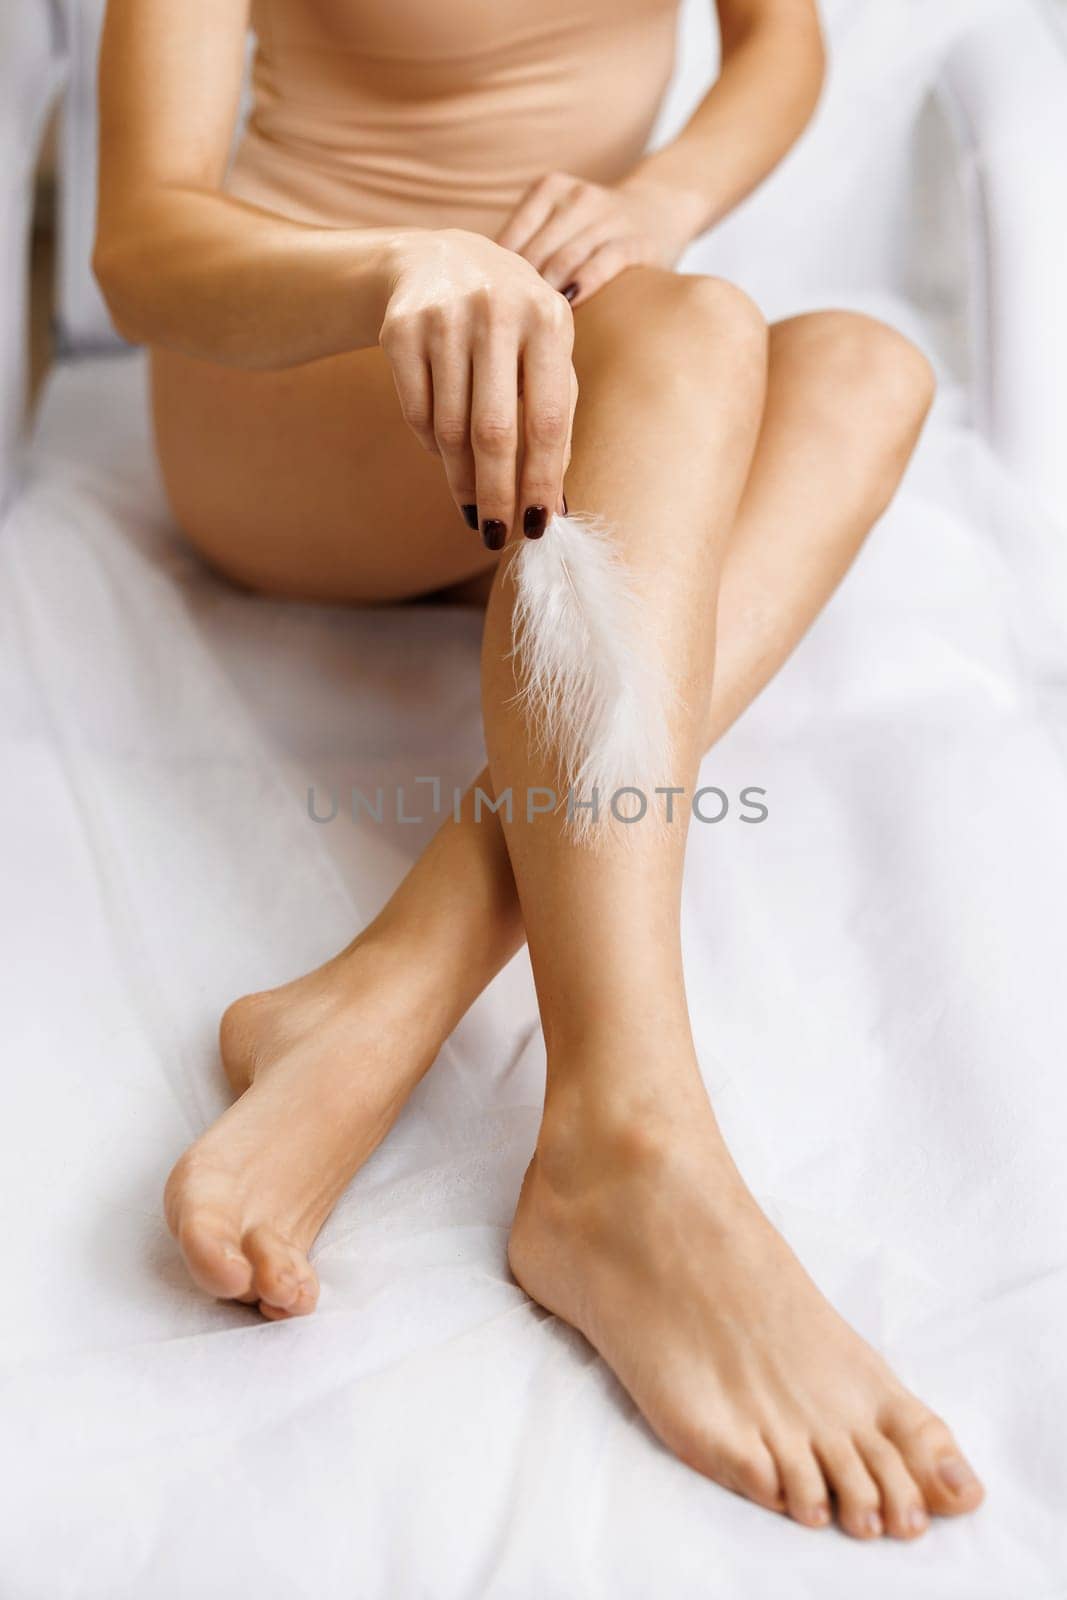 Closeup of female legs with smooth skin and soft ostrich feather. Concepts of skin care and hair removal treatment. Woman touches her legs with white feather.